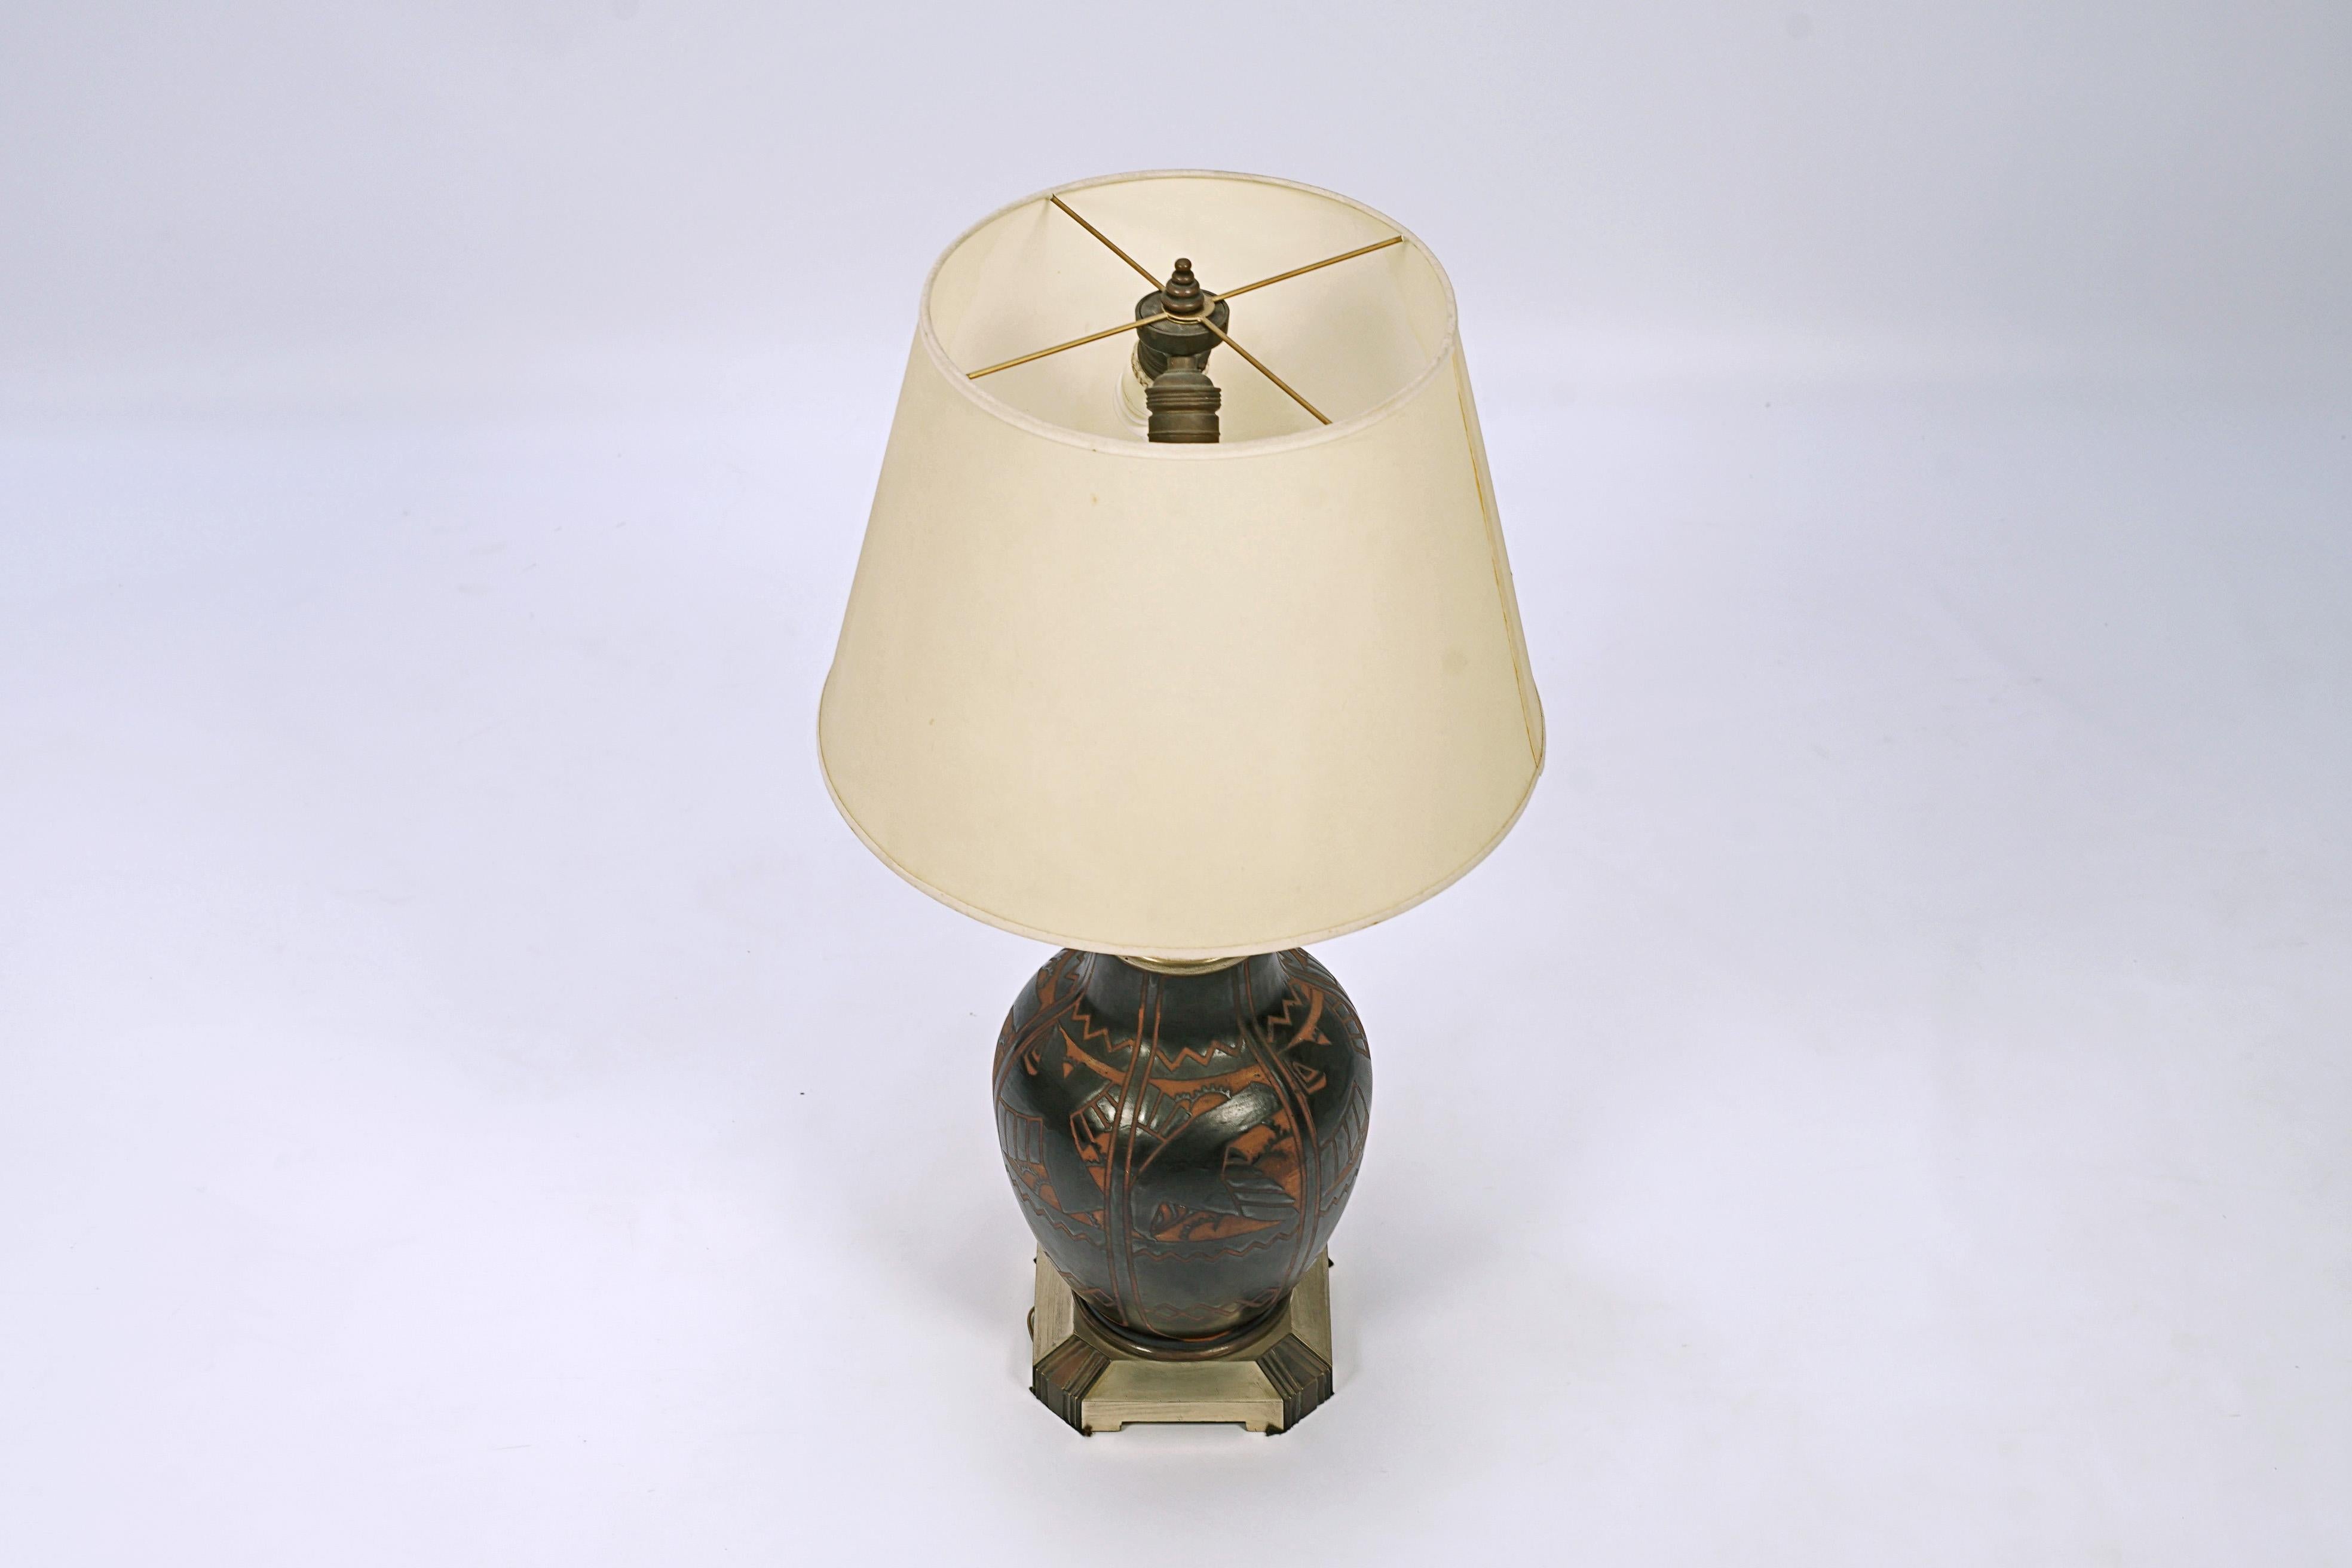 Ceramic lamp by Charles Catteau (1880-1966) and manufactured by Boch (Under the Grès Keramis mark). Design number D.1009.

Belgium, CIRCA 1925.